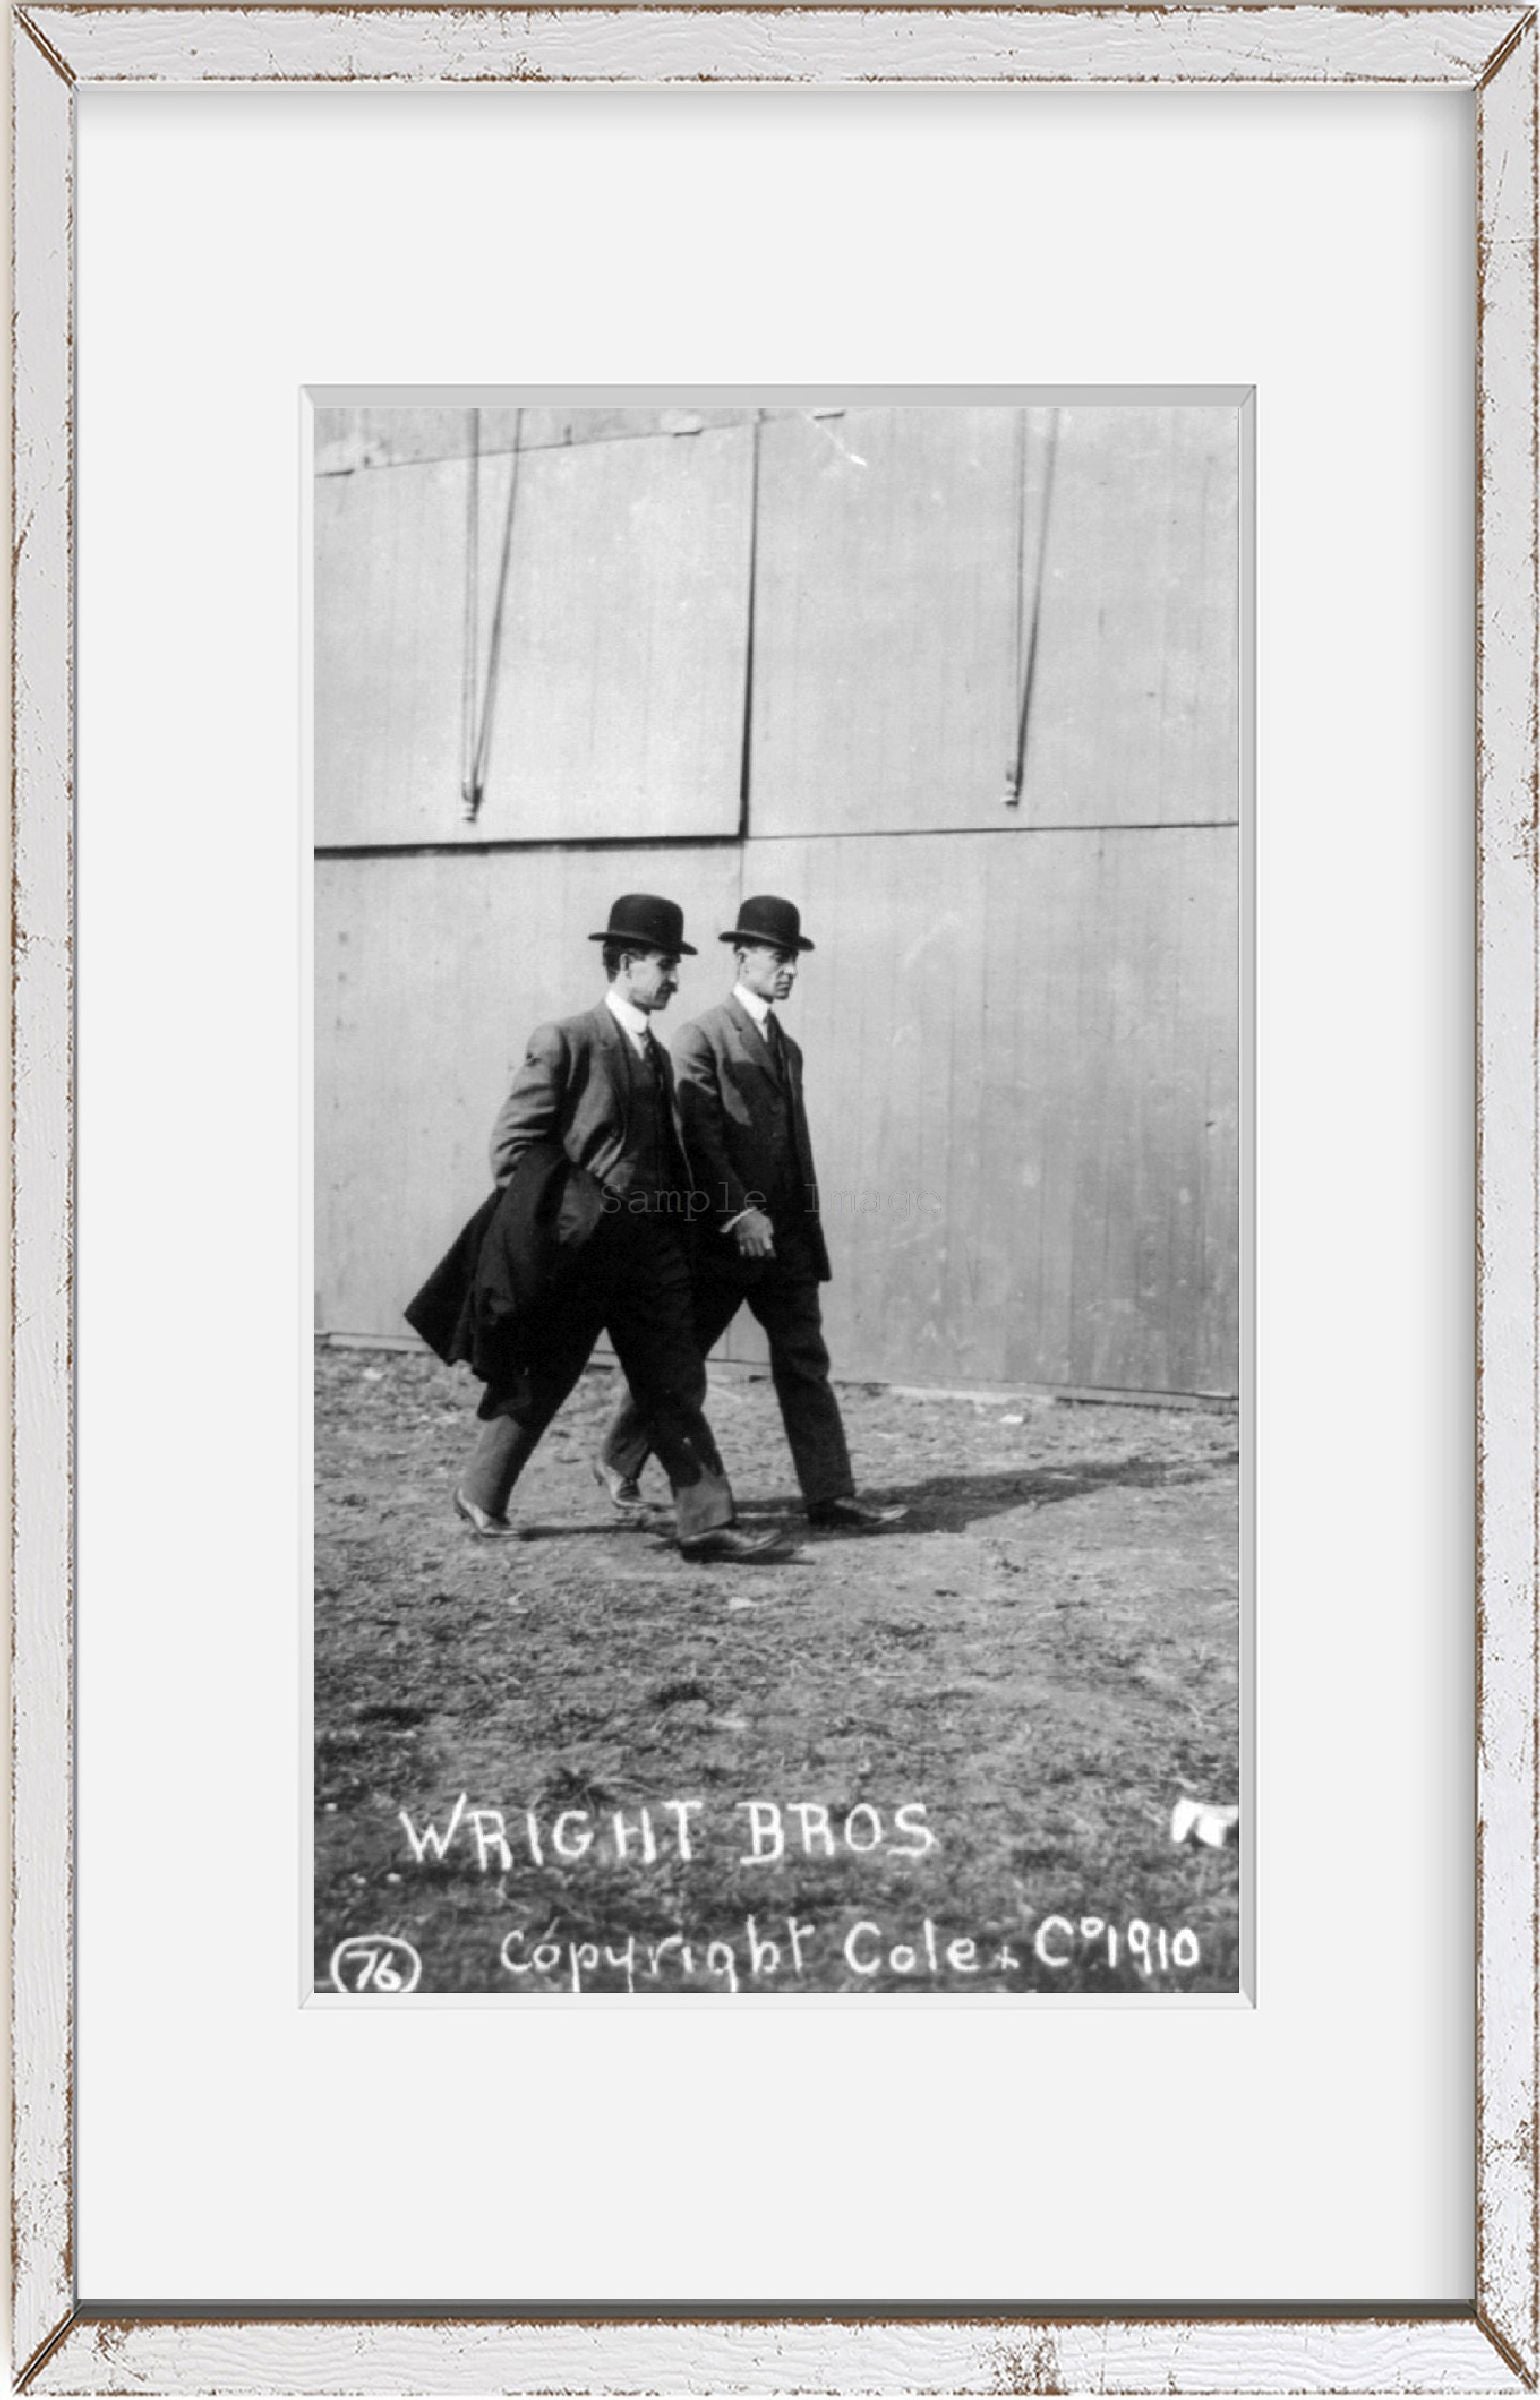 c1910 Nov. 16 photograph of The Wright brothers at the International Aviation To